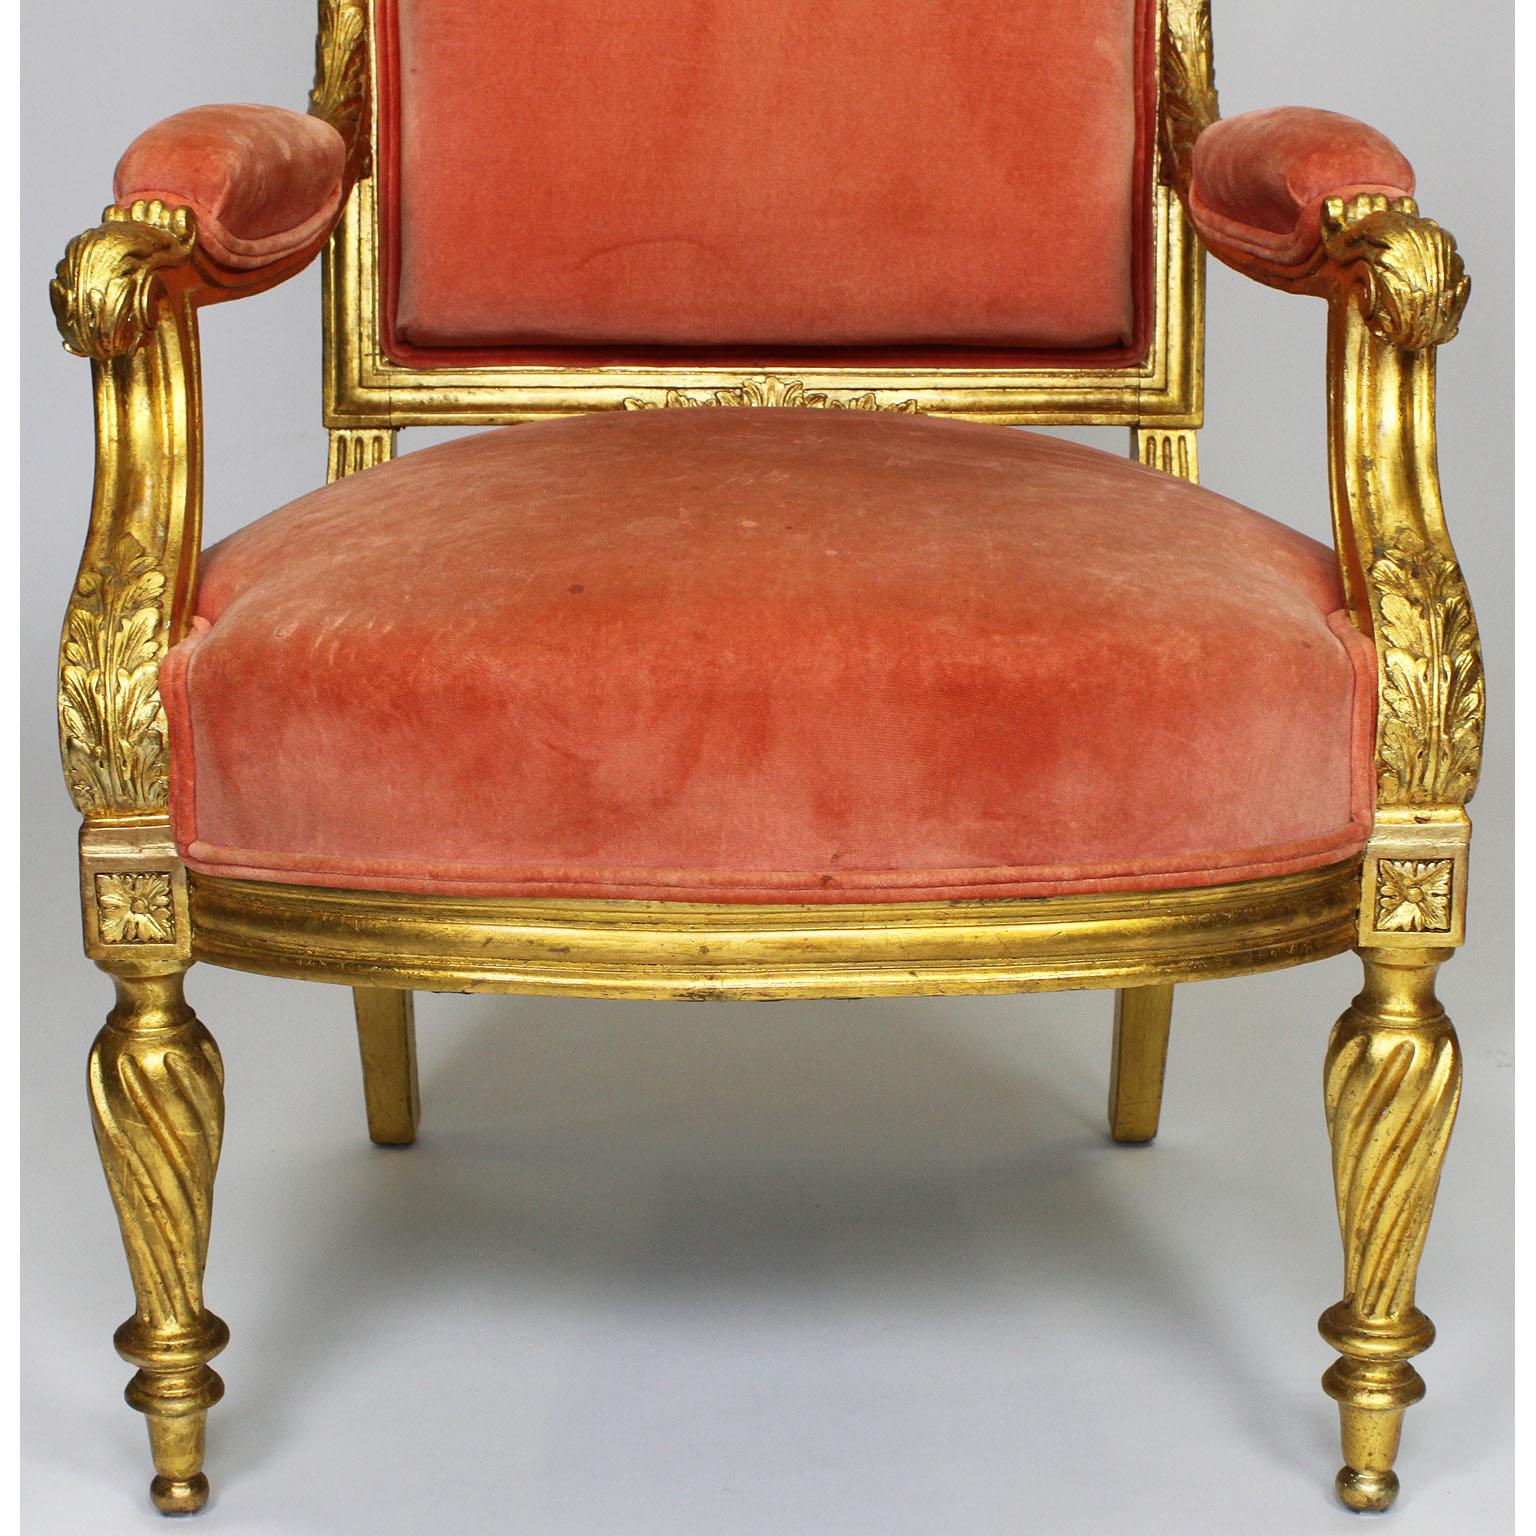 French Louis XVI Style 19th Century Giltwood Carved Three-Piece Salon Suite For Sale 1